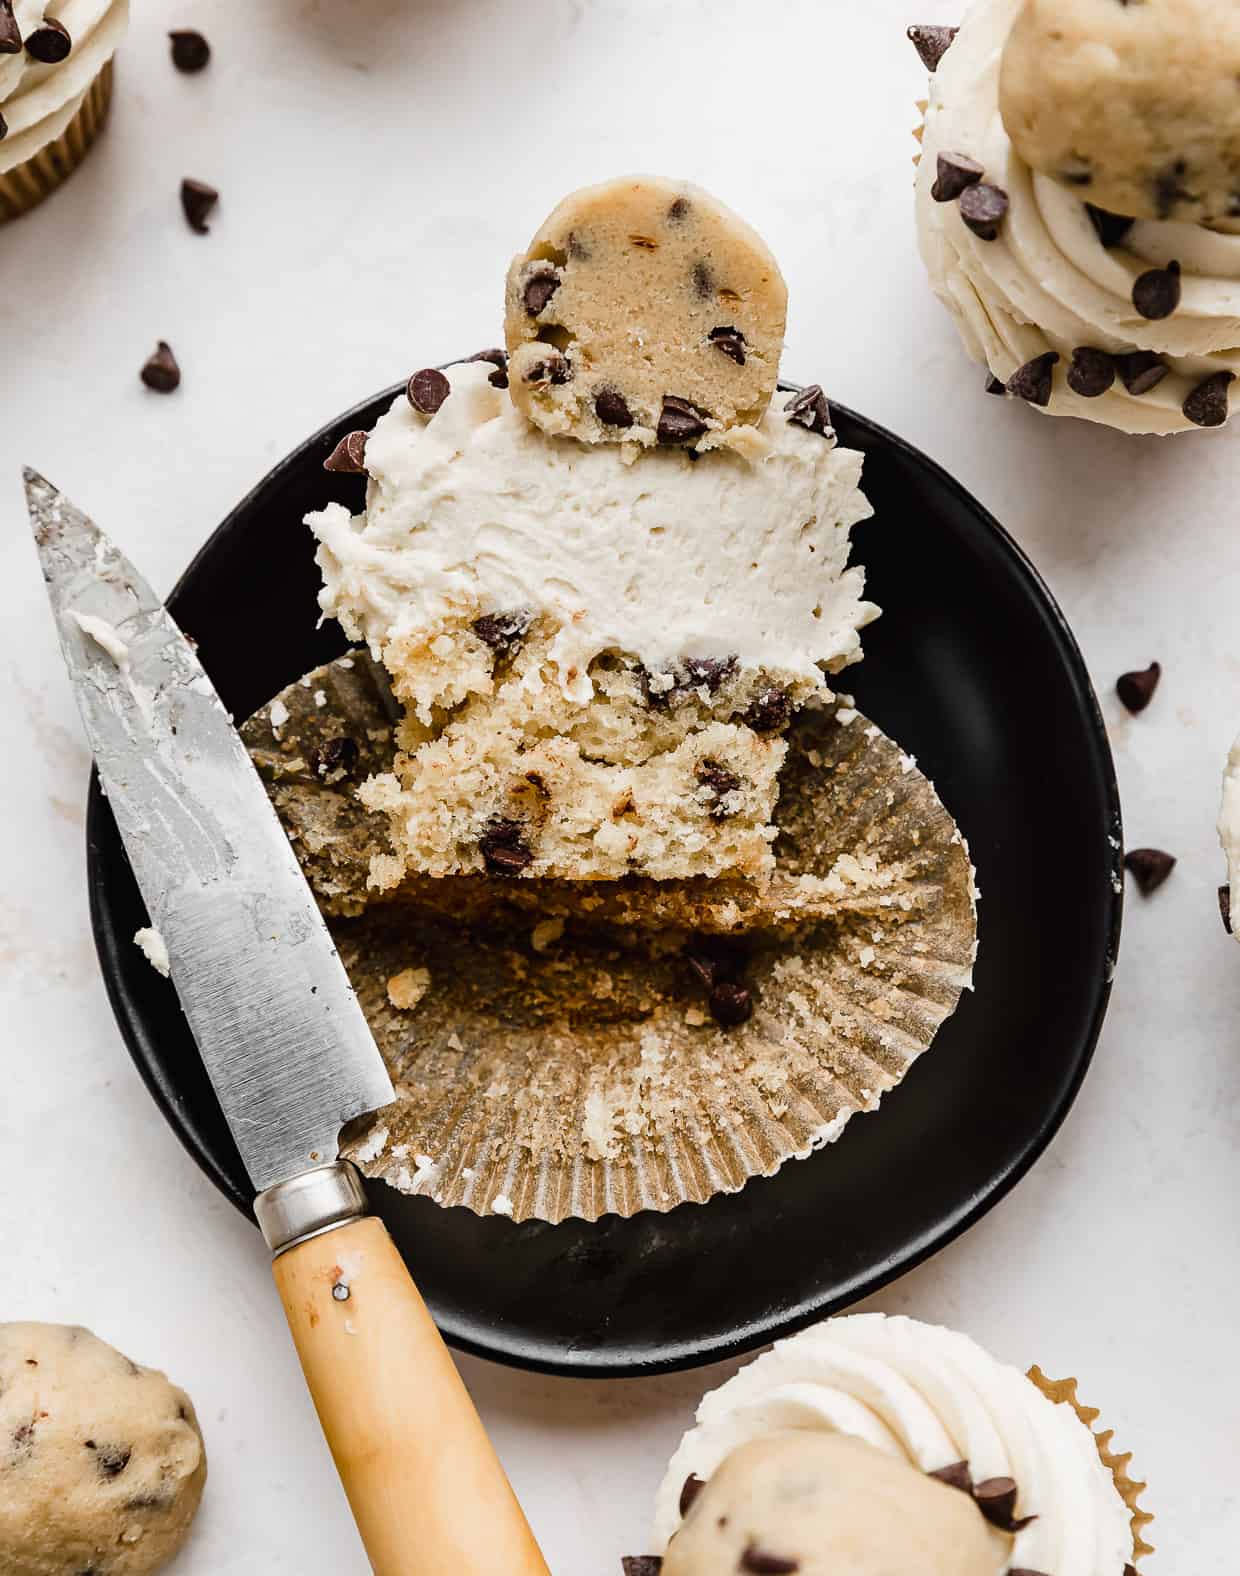 A Cookie Dough Cupcake sliced in half on a black plate.